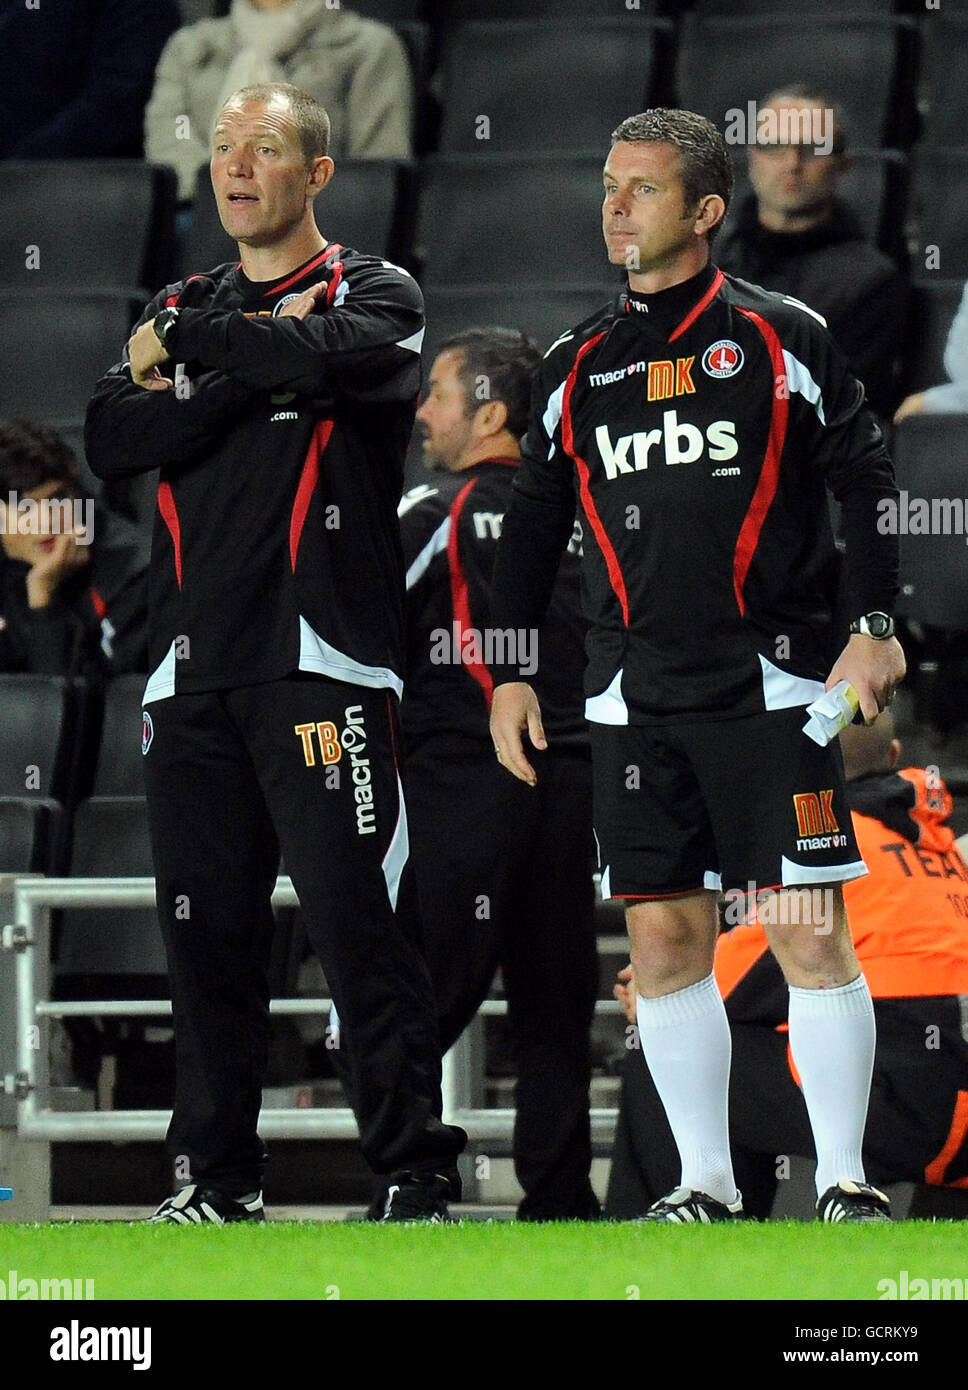 Charlton Athletic's Mark Kinsella (right) and Tim Breacker on the touchline Stock Photo